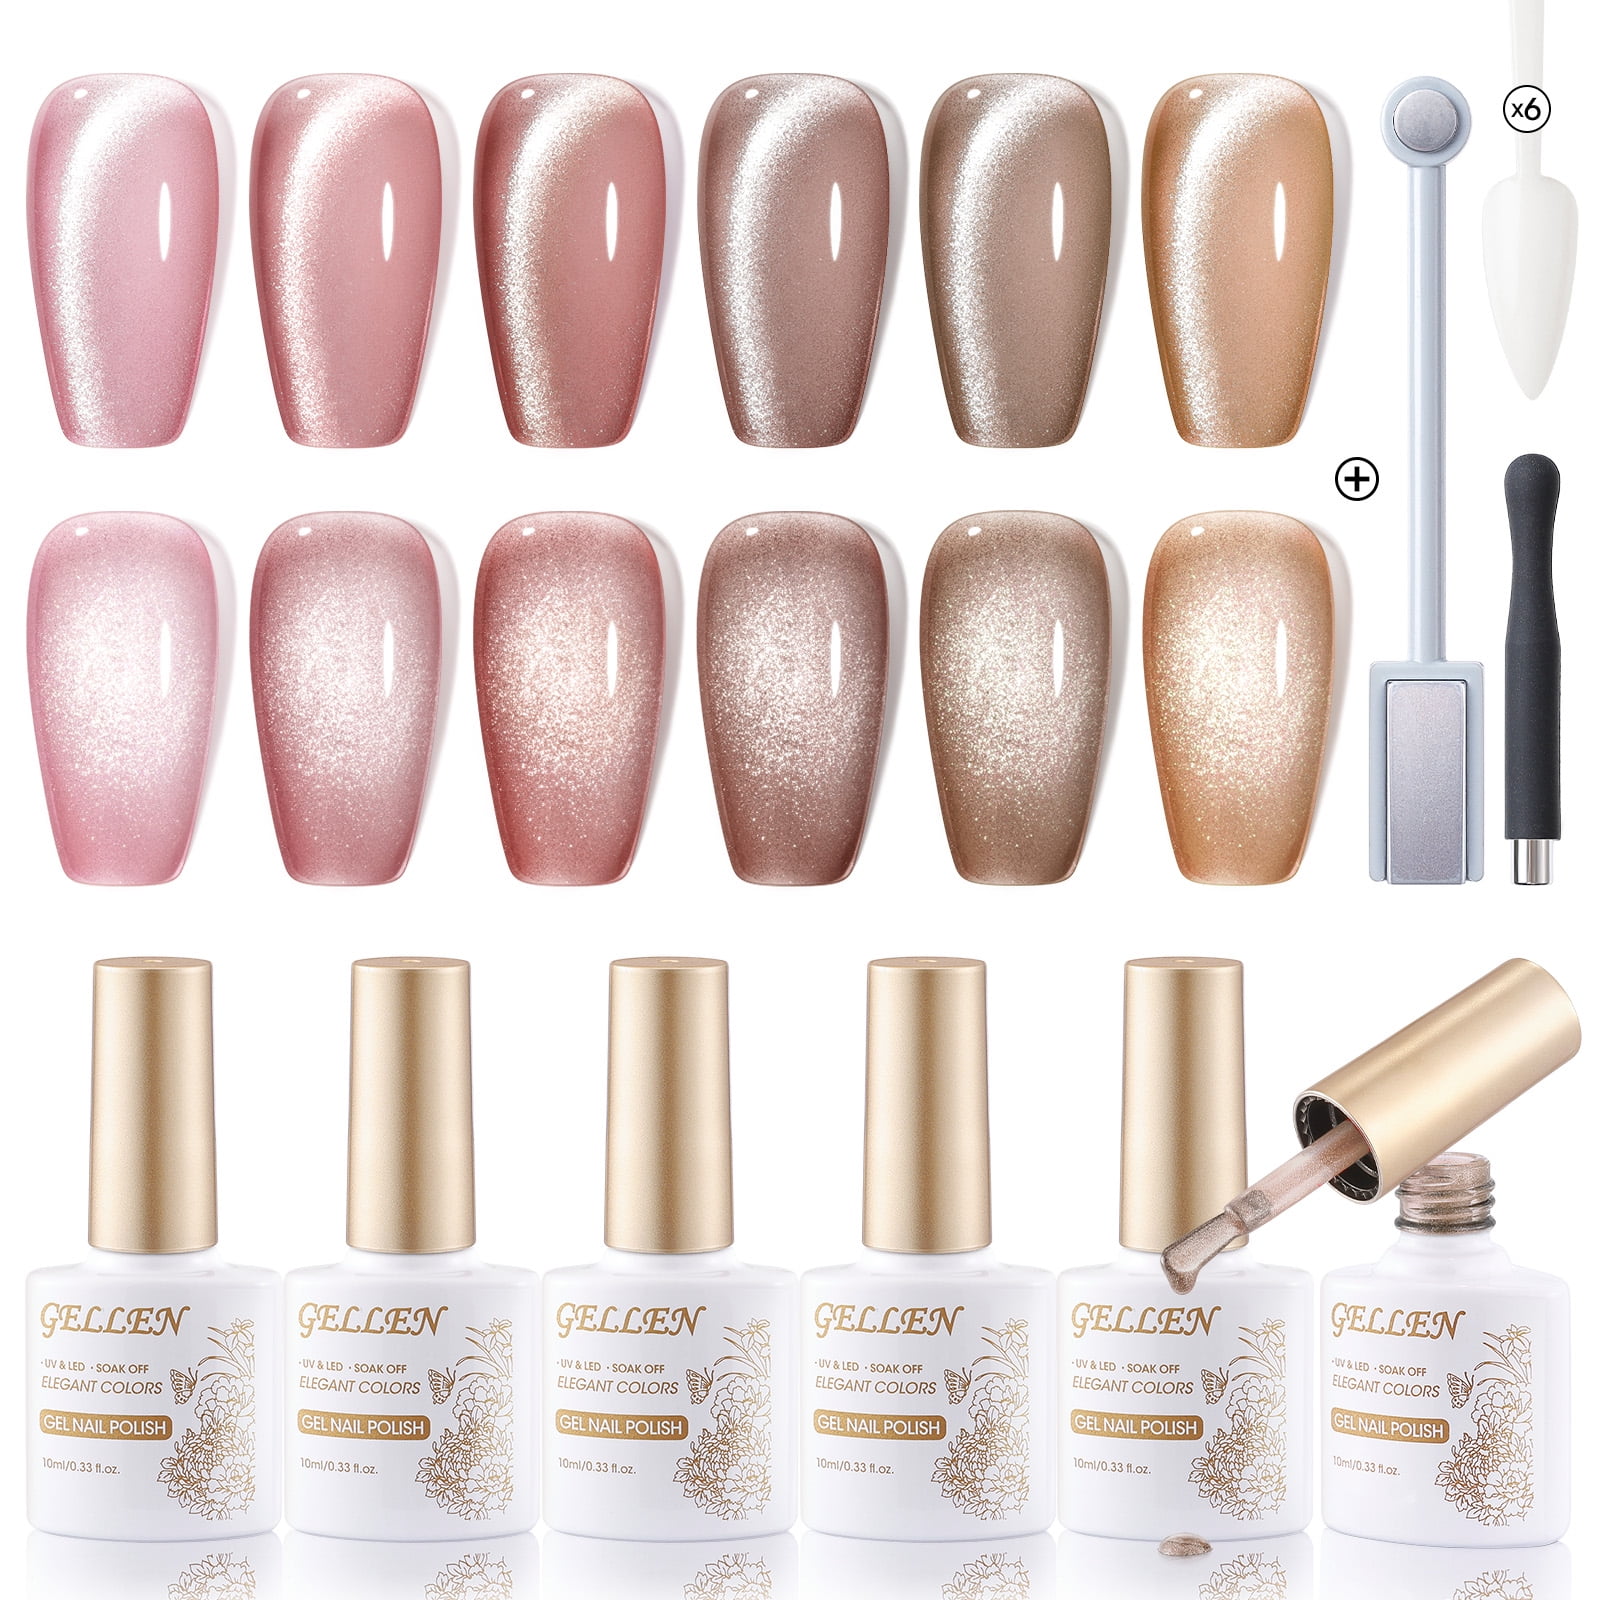 Buy MODELONES To Mix Every Cocktail 9 Shades Palette Solid Cream Pudding Gel  - Temperature Color Changing Gel Polish UV NaIl Gel Polish Color Cube gel  Need UV Lamp to Cure UV